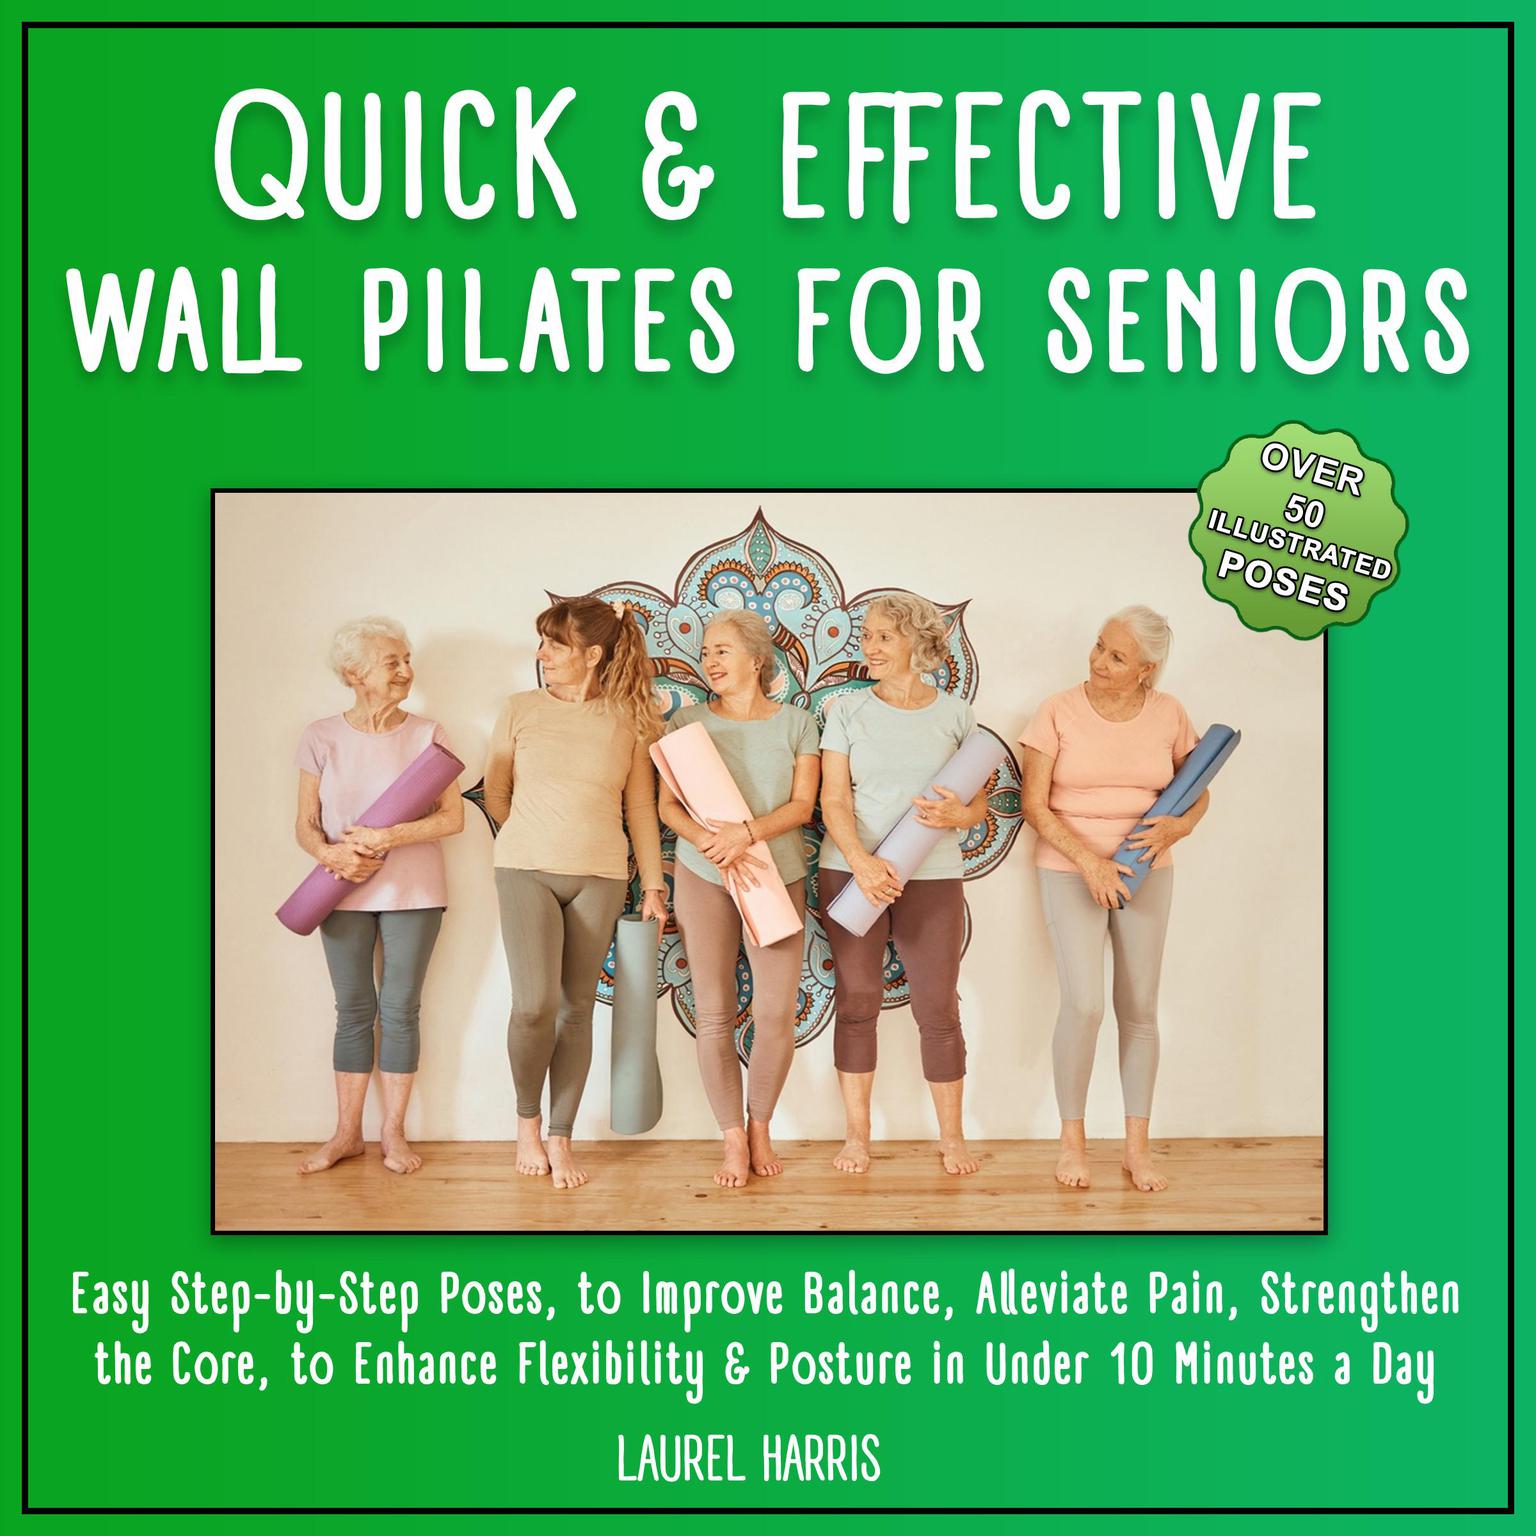 Quick and Effective Wall Pilates for Seniors: 50+ Easy Step-by-Step Poses, to Improve Balance, Alleviate Pain, Strengthen the Core, to Enhance Flexibility & Posture in Under 10 Minutes a Day Audiobook, by Laurel Harris